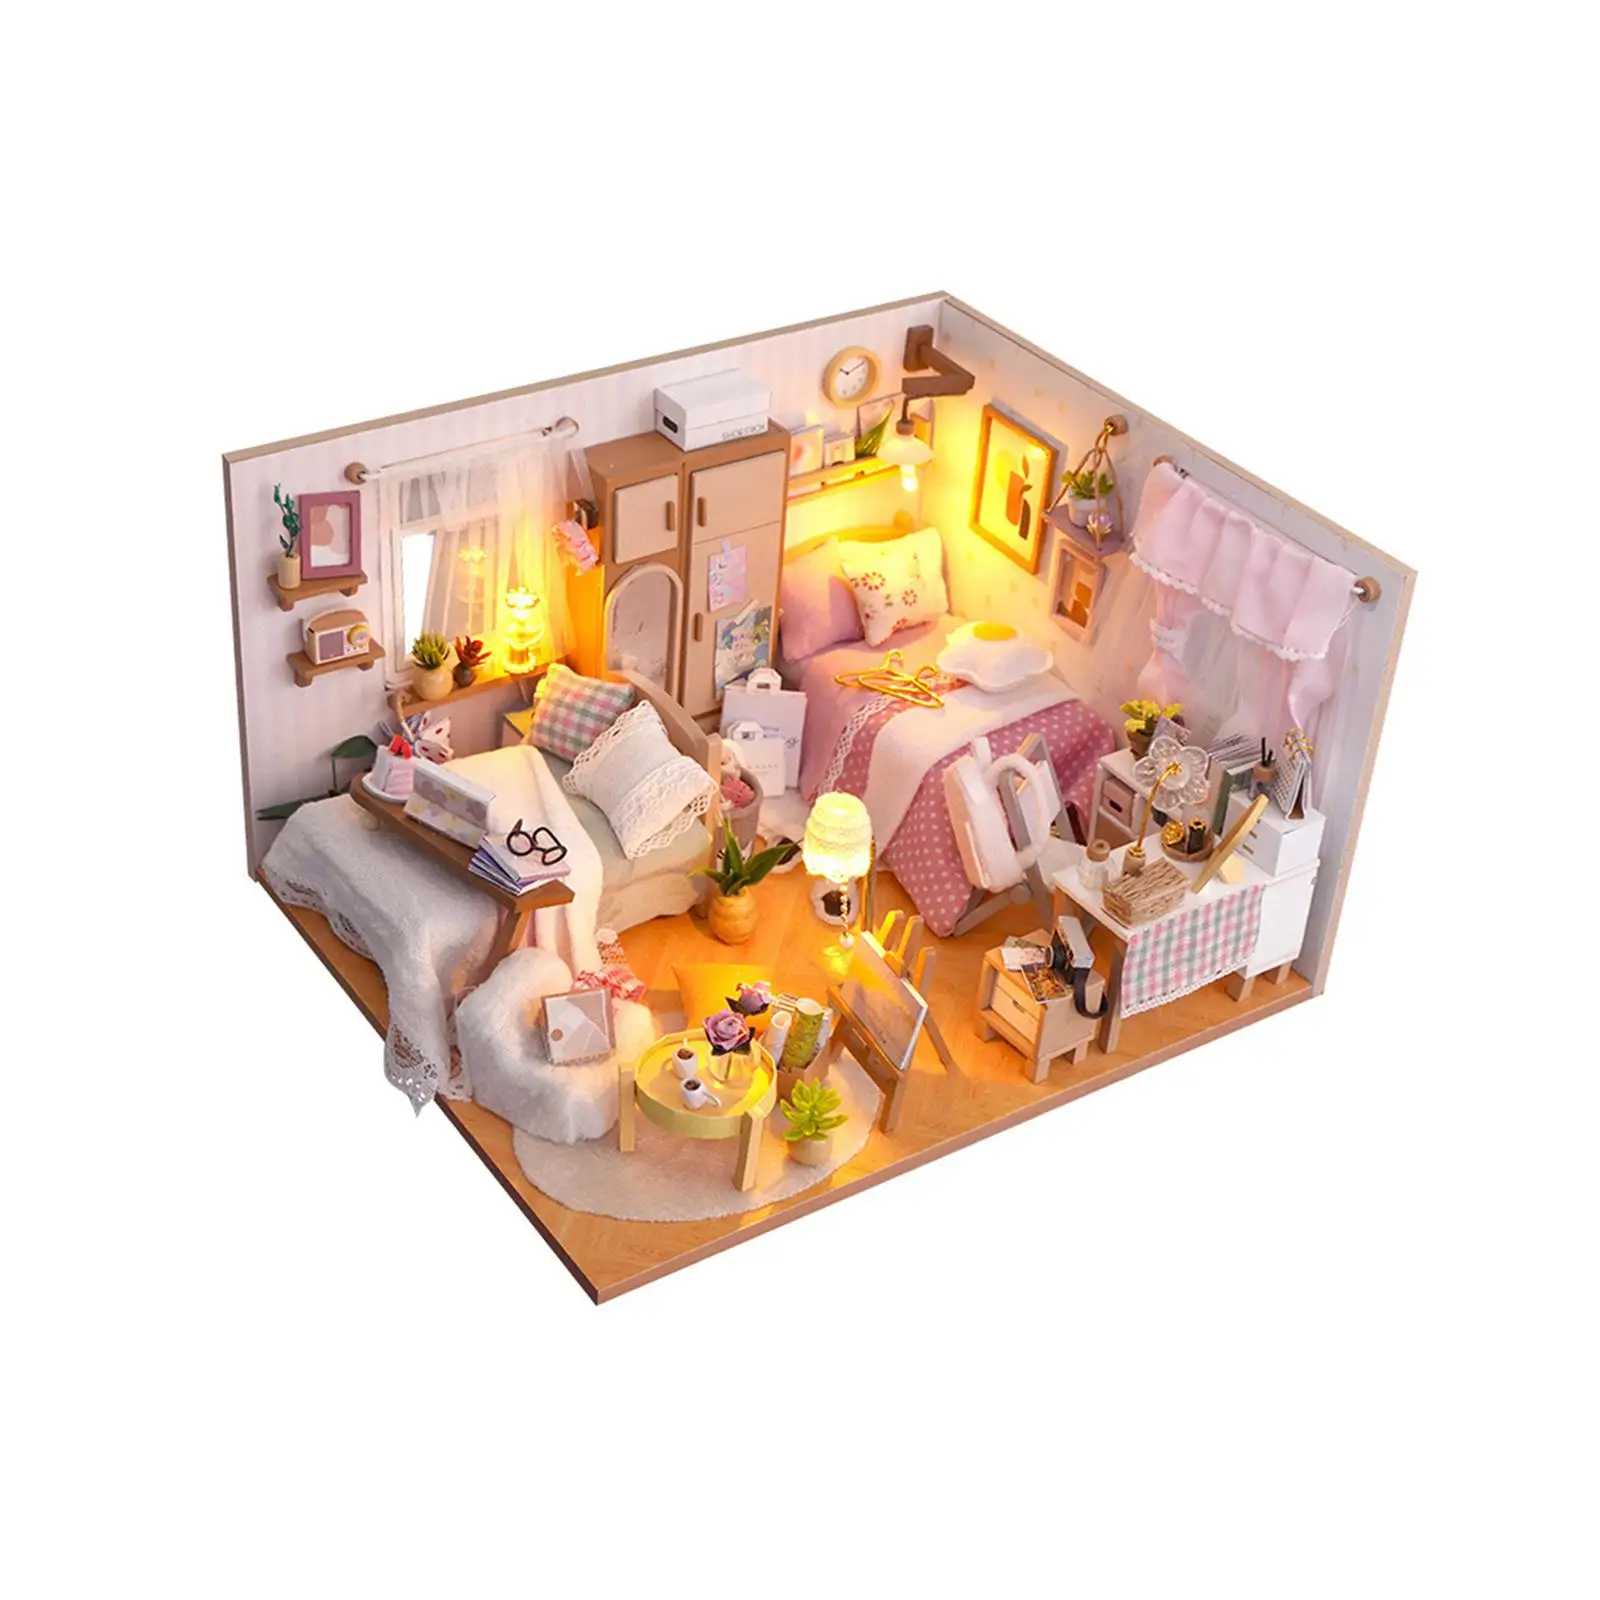 DIY Wooden Miniature Dollhouse Kits Birthday Gifts Collectibles with Furniture and Ornaments Educational Toy Creative Bedroom